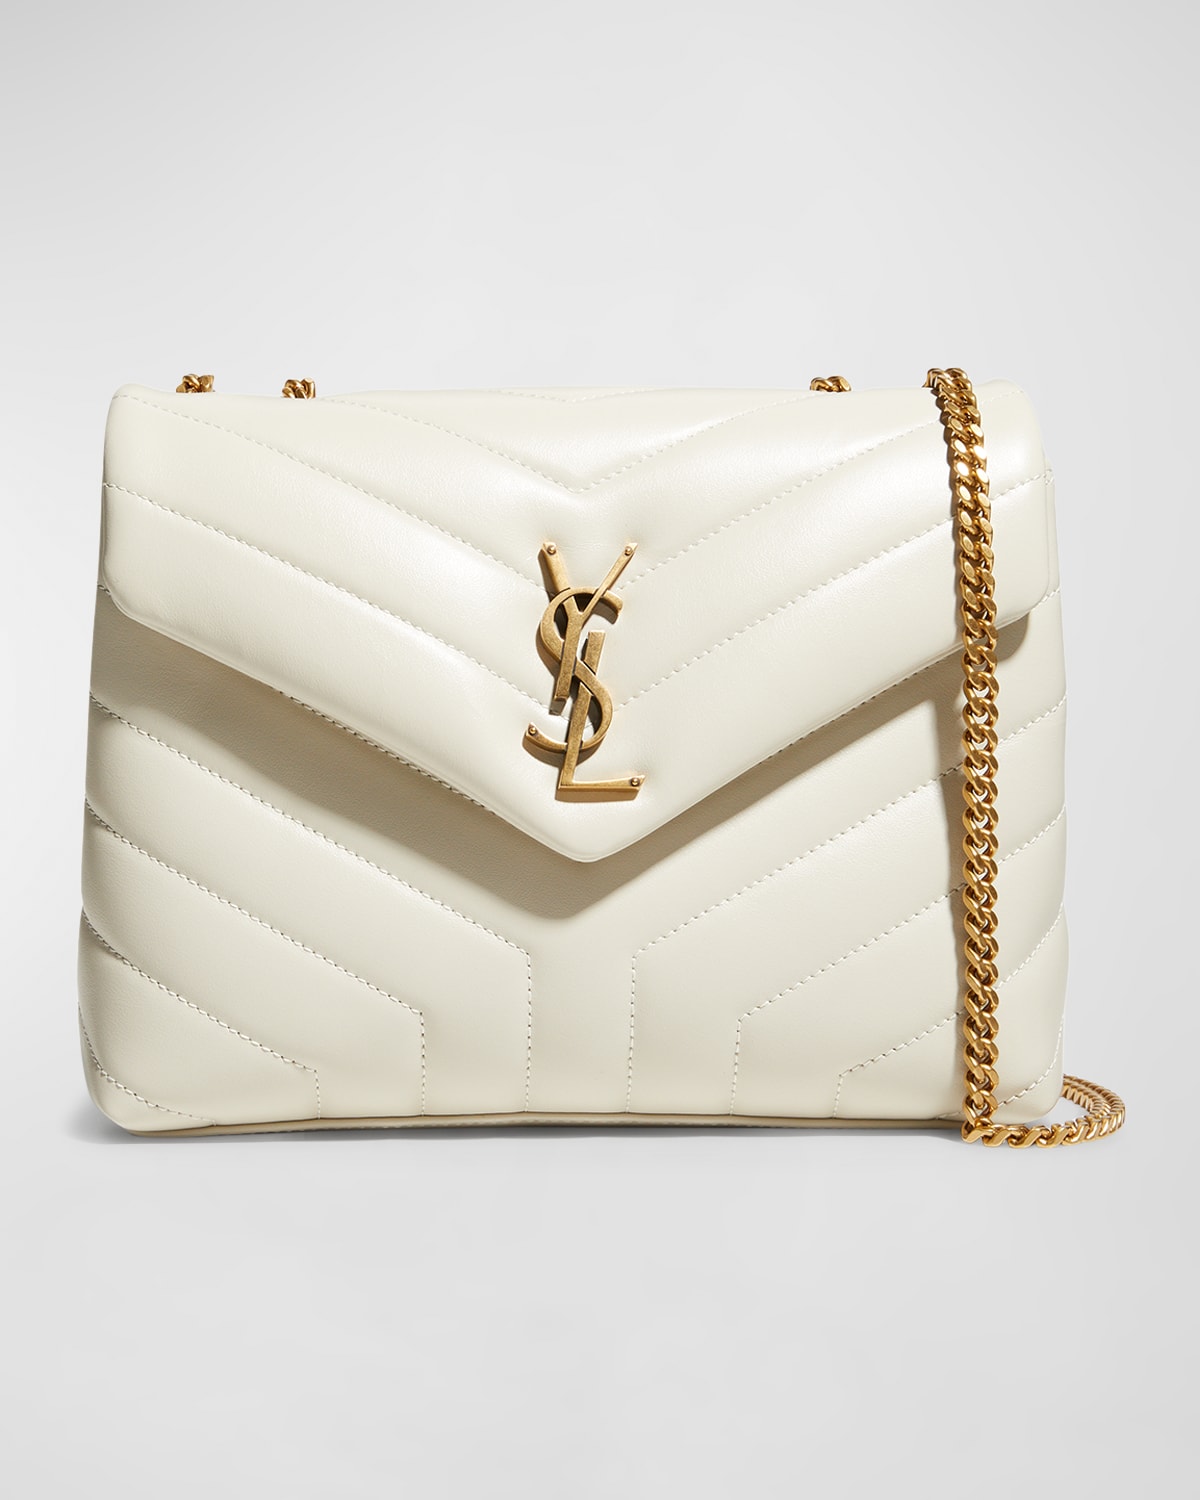 SAINT LAURENT LOULOU SMALL YSL SHOULDER BAG IN QUILTED LEATHER